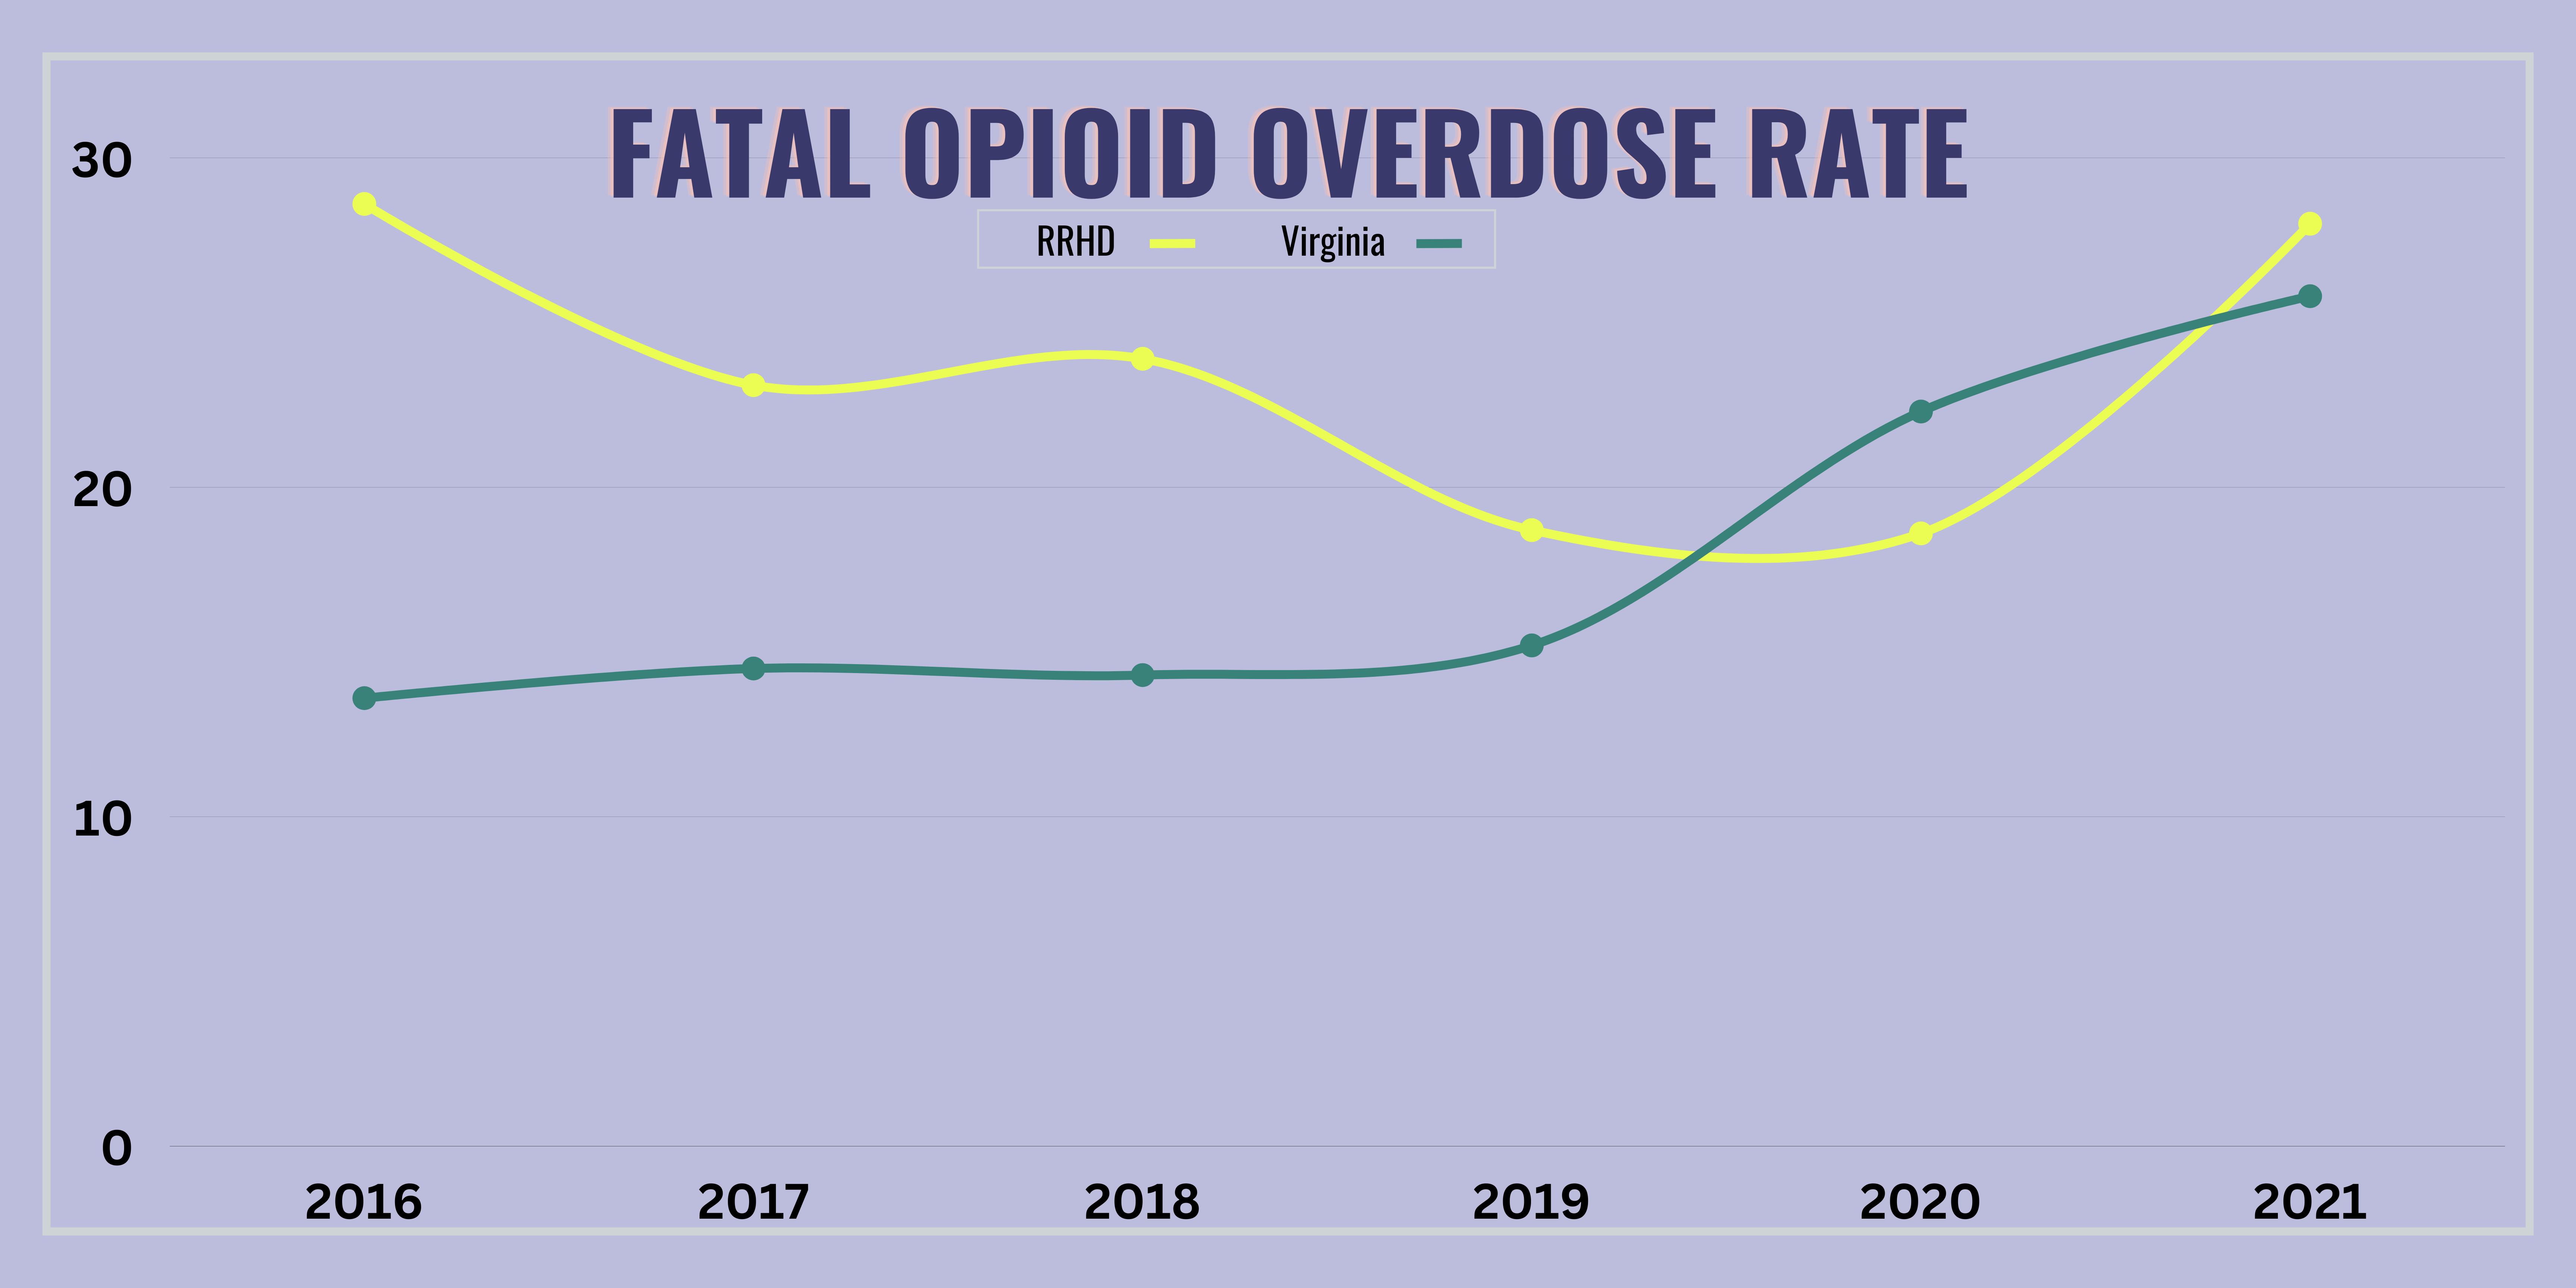 Fatal Opioid Overdose Rate Graph
RRHD and Virginia has been experiencing an increase in fatal opioid overdoses. 